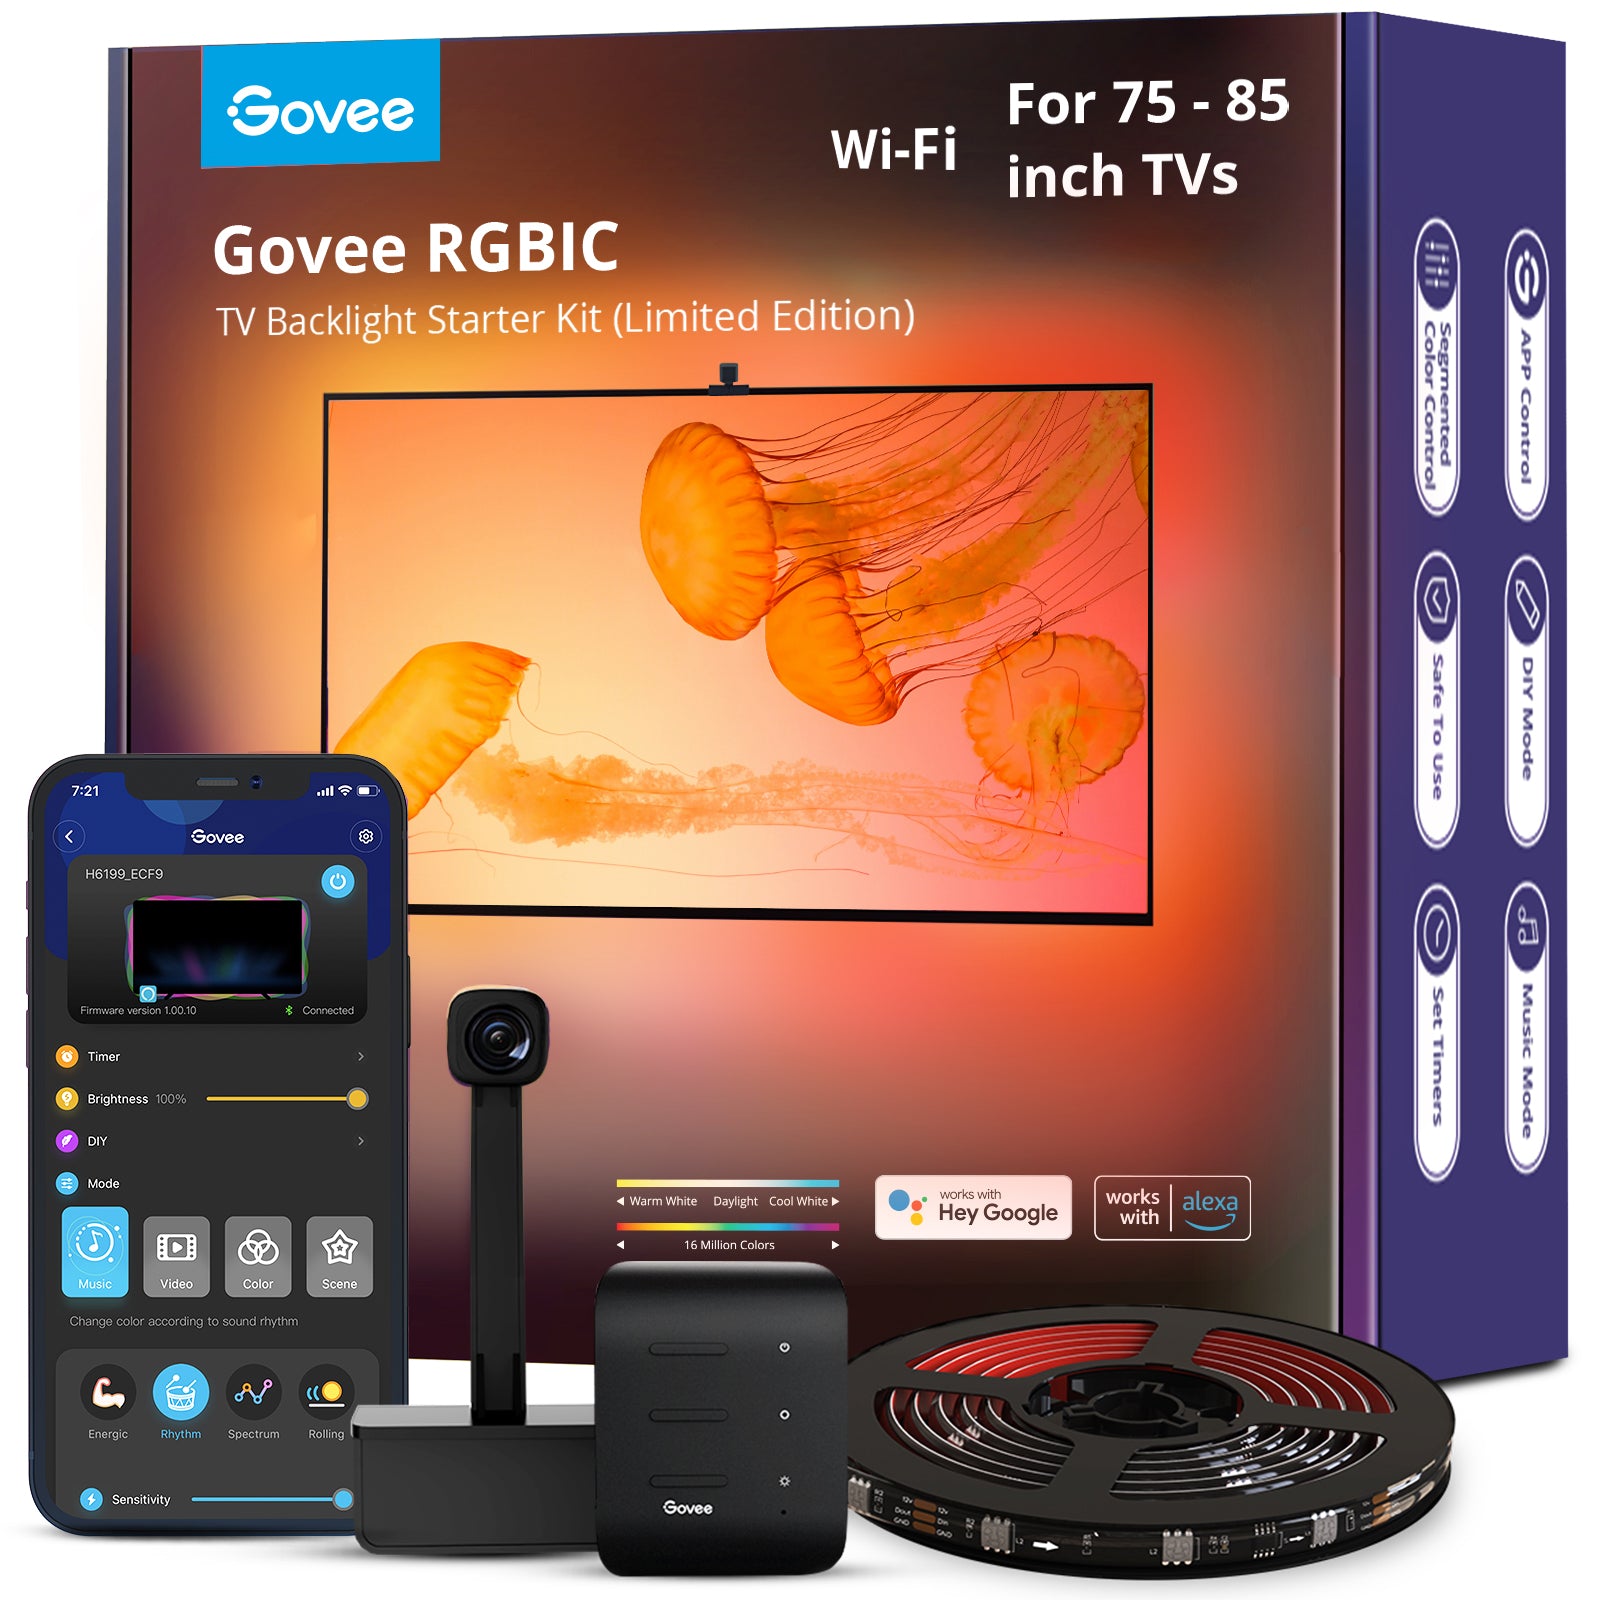 Govee RGBIC TV Backlight Starter Kit 75"-85" (Limited Edition)